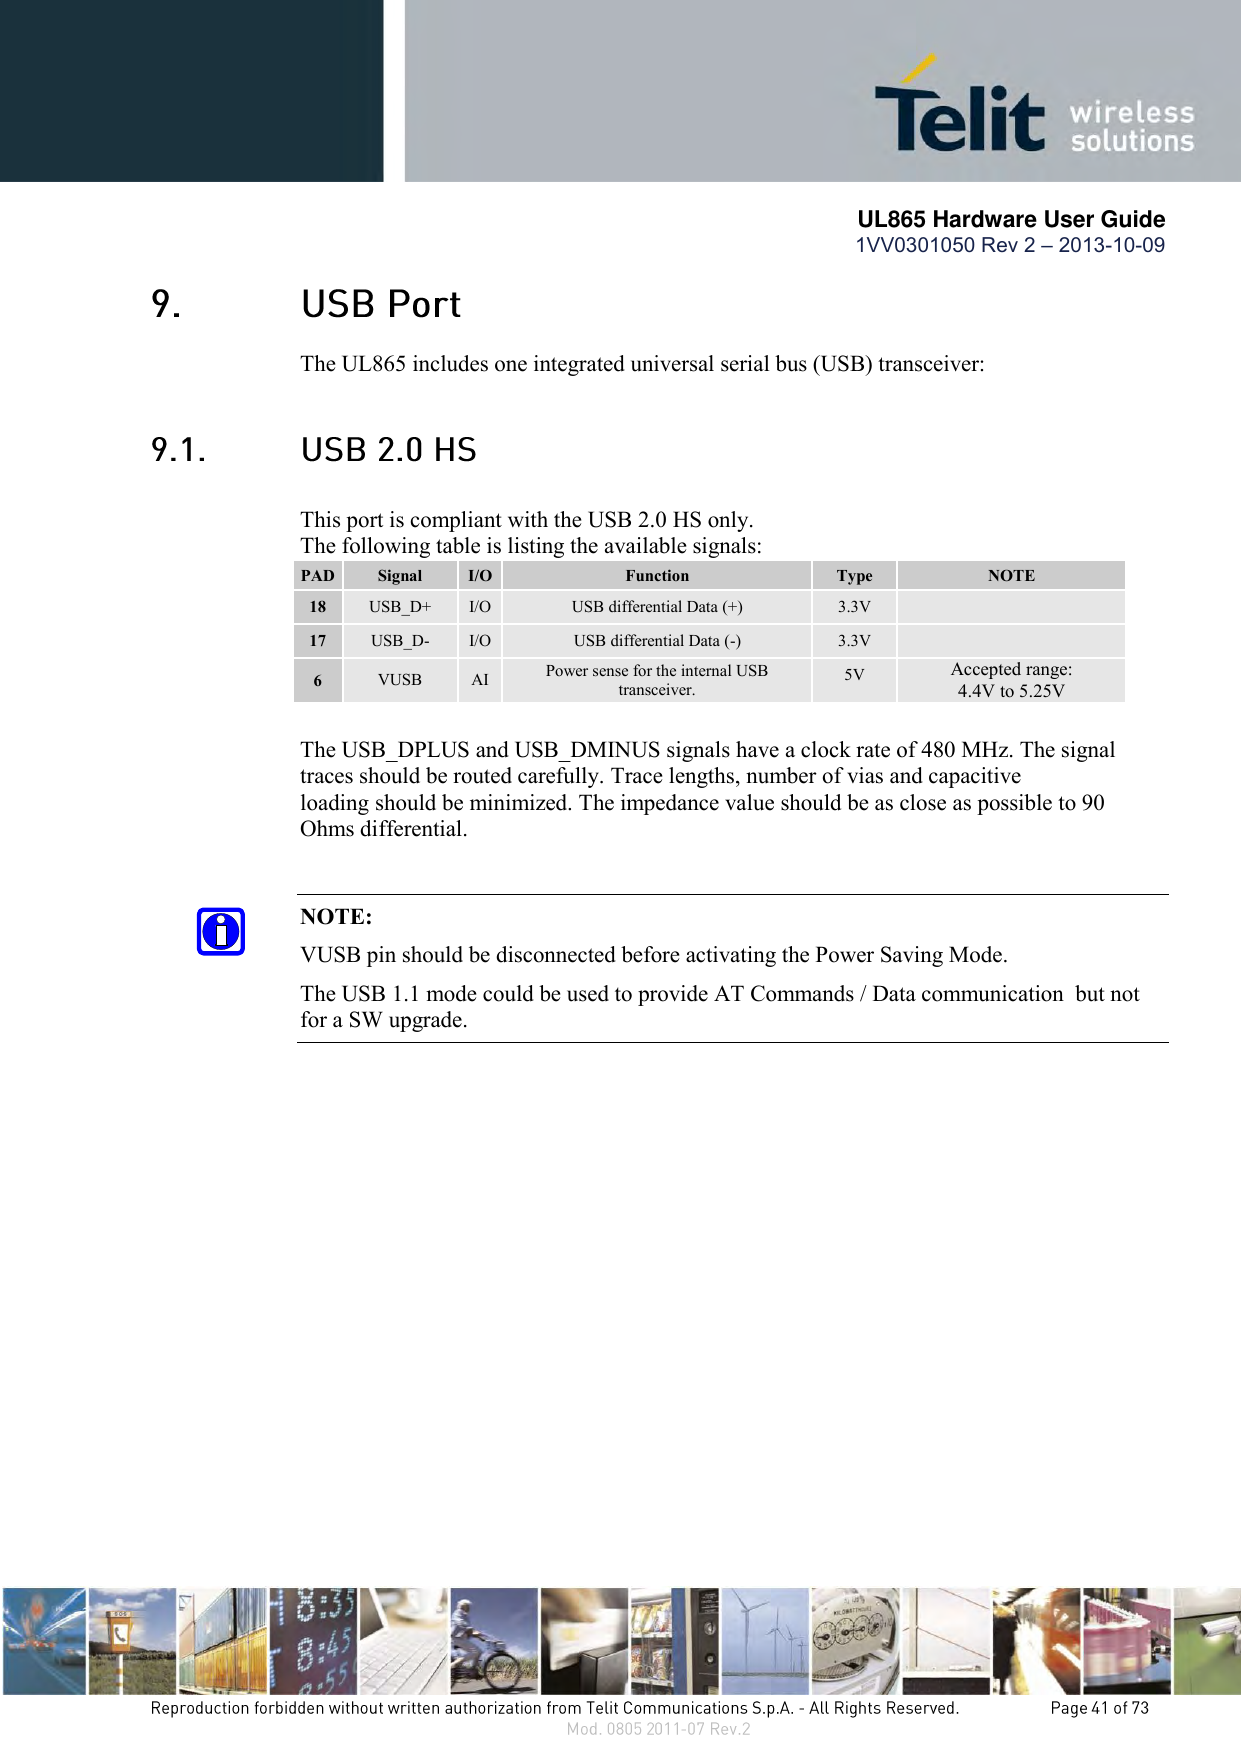       UL865 Hardware User Guide 1VV0301050 Rev 2 – 2013-10-09    The UL865 includes one integrated universal serial bus (USB) transceiver:  This port is compliant with the USB 2.0 HS only.   The following table is listing the available signals: PAD Signal I/O Function Type NOTE 18 USB_D+ I/O USB differential Data (+) 3.3V  17 USB_D- I/O USB differential Data (-) 3.3V  6 VUSB AI Power sense for the internal USB transceiver. 5V Accepted range:  4.4V to 5.25V      The USB_DPLUS and USB_DMINUS signals have a clock rate of 480 MHz. The signal      traces should be routed carefully. Trace lengths, number of vias and capacitive        loading  should be minimized. The impedance value should be as close as possible to 90      Ohms differential.  NOTE: VUSB pin should be disconnected before activating the Power Saving Mode. The USB 1.1 mode could be used to provide AT Commands / Data communication  but not for a SW upgrade.                   